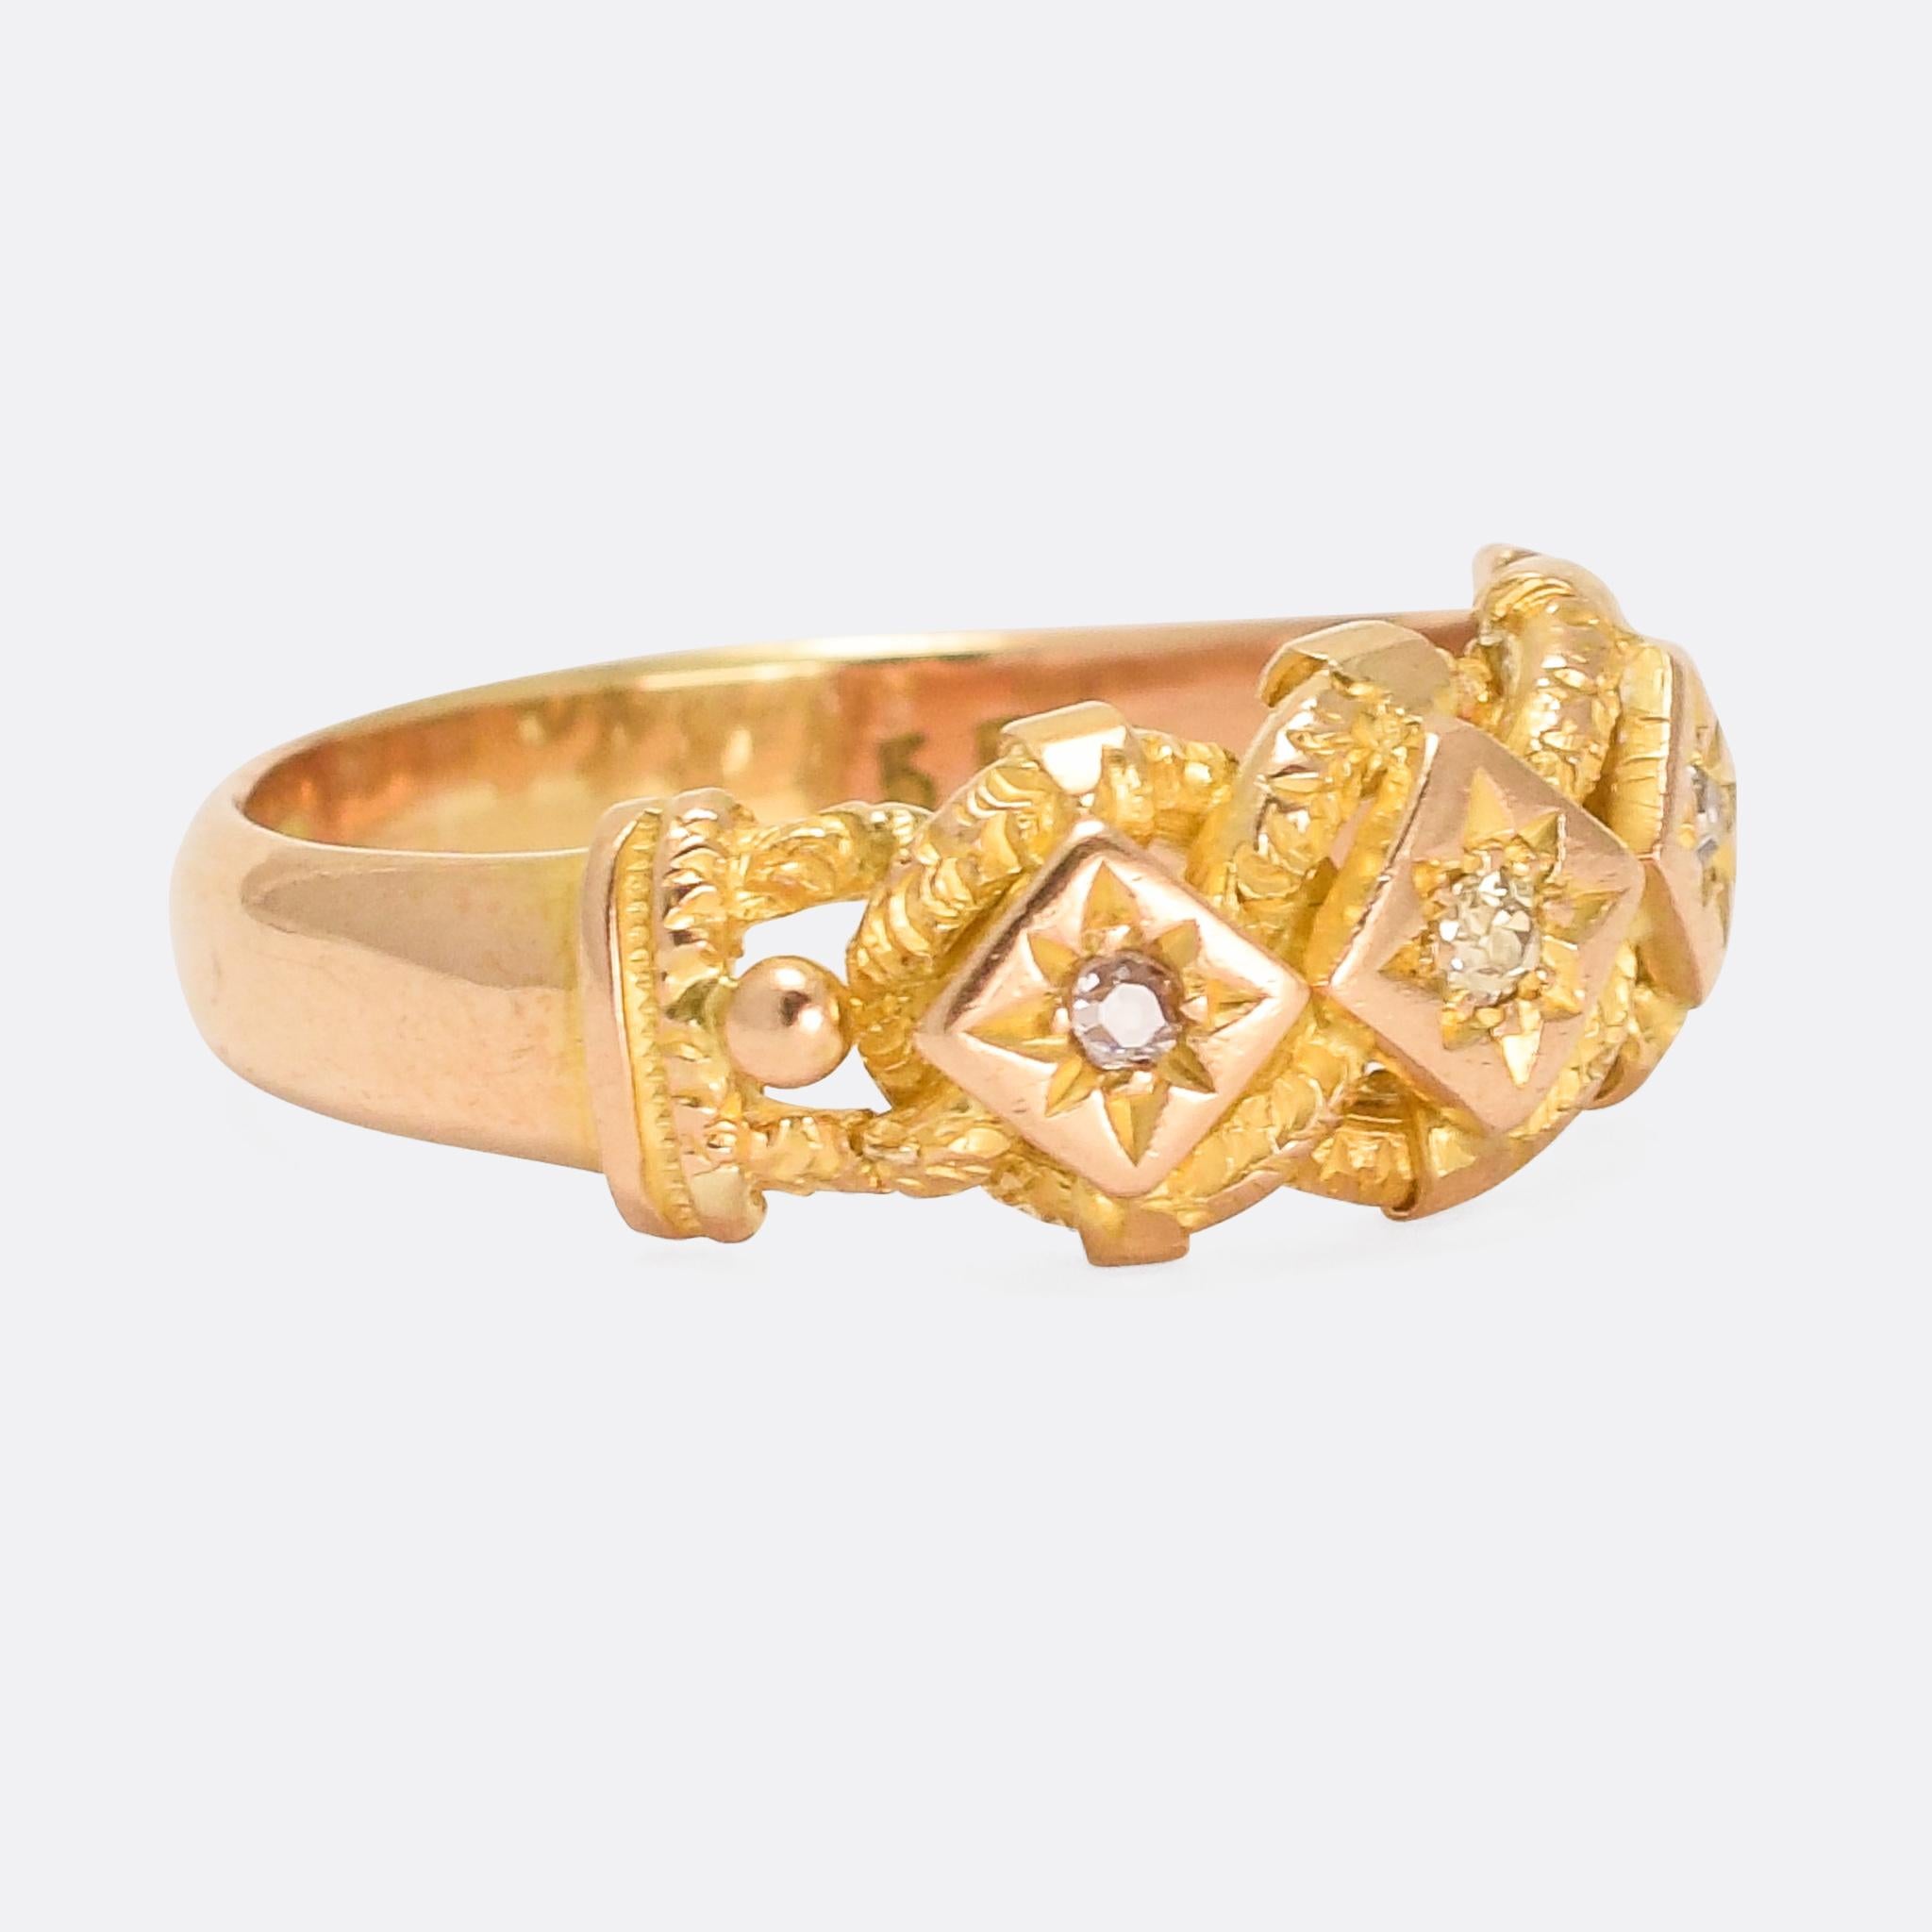 A quality antique three-stone keeper ring dating from 1870. The diamonds rest in stylised star mounts, each of which sits in the middle of a curb chain link. It's modelled in 18 karat gold, with a good substantial feel to it and interesting chased